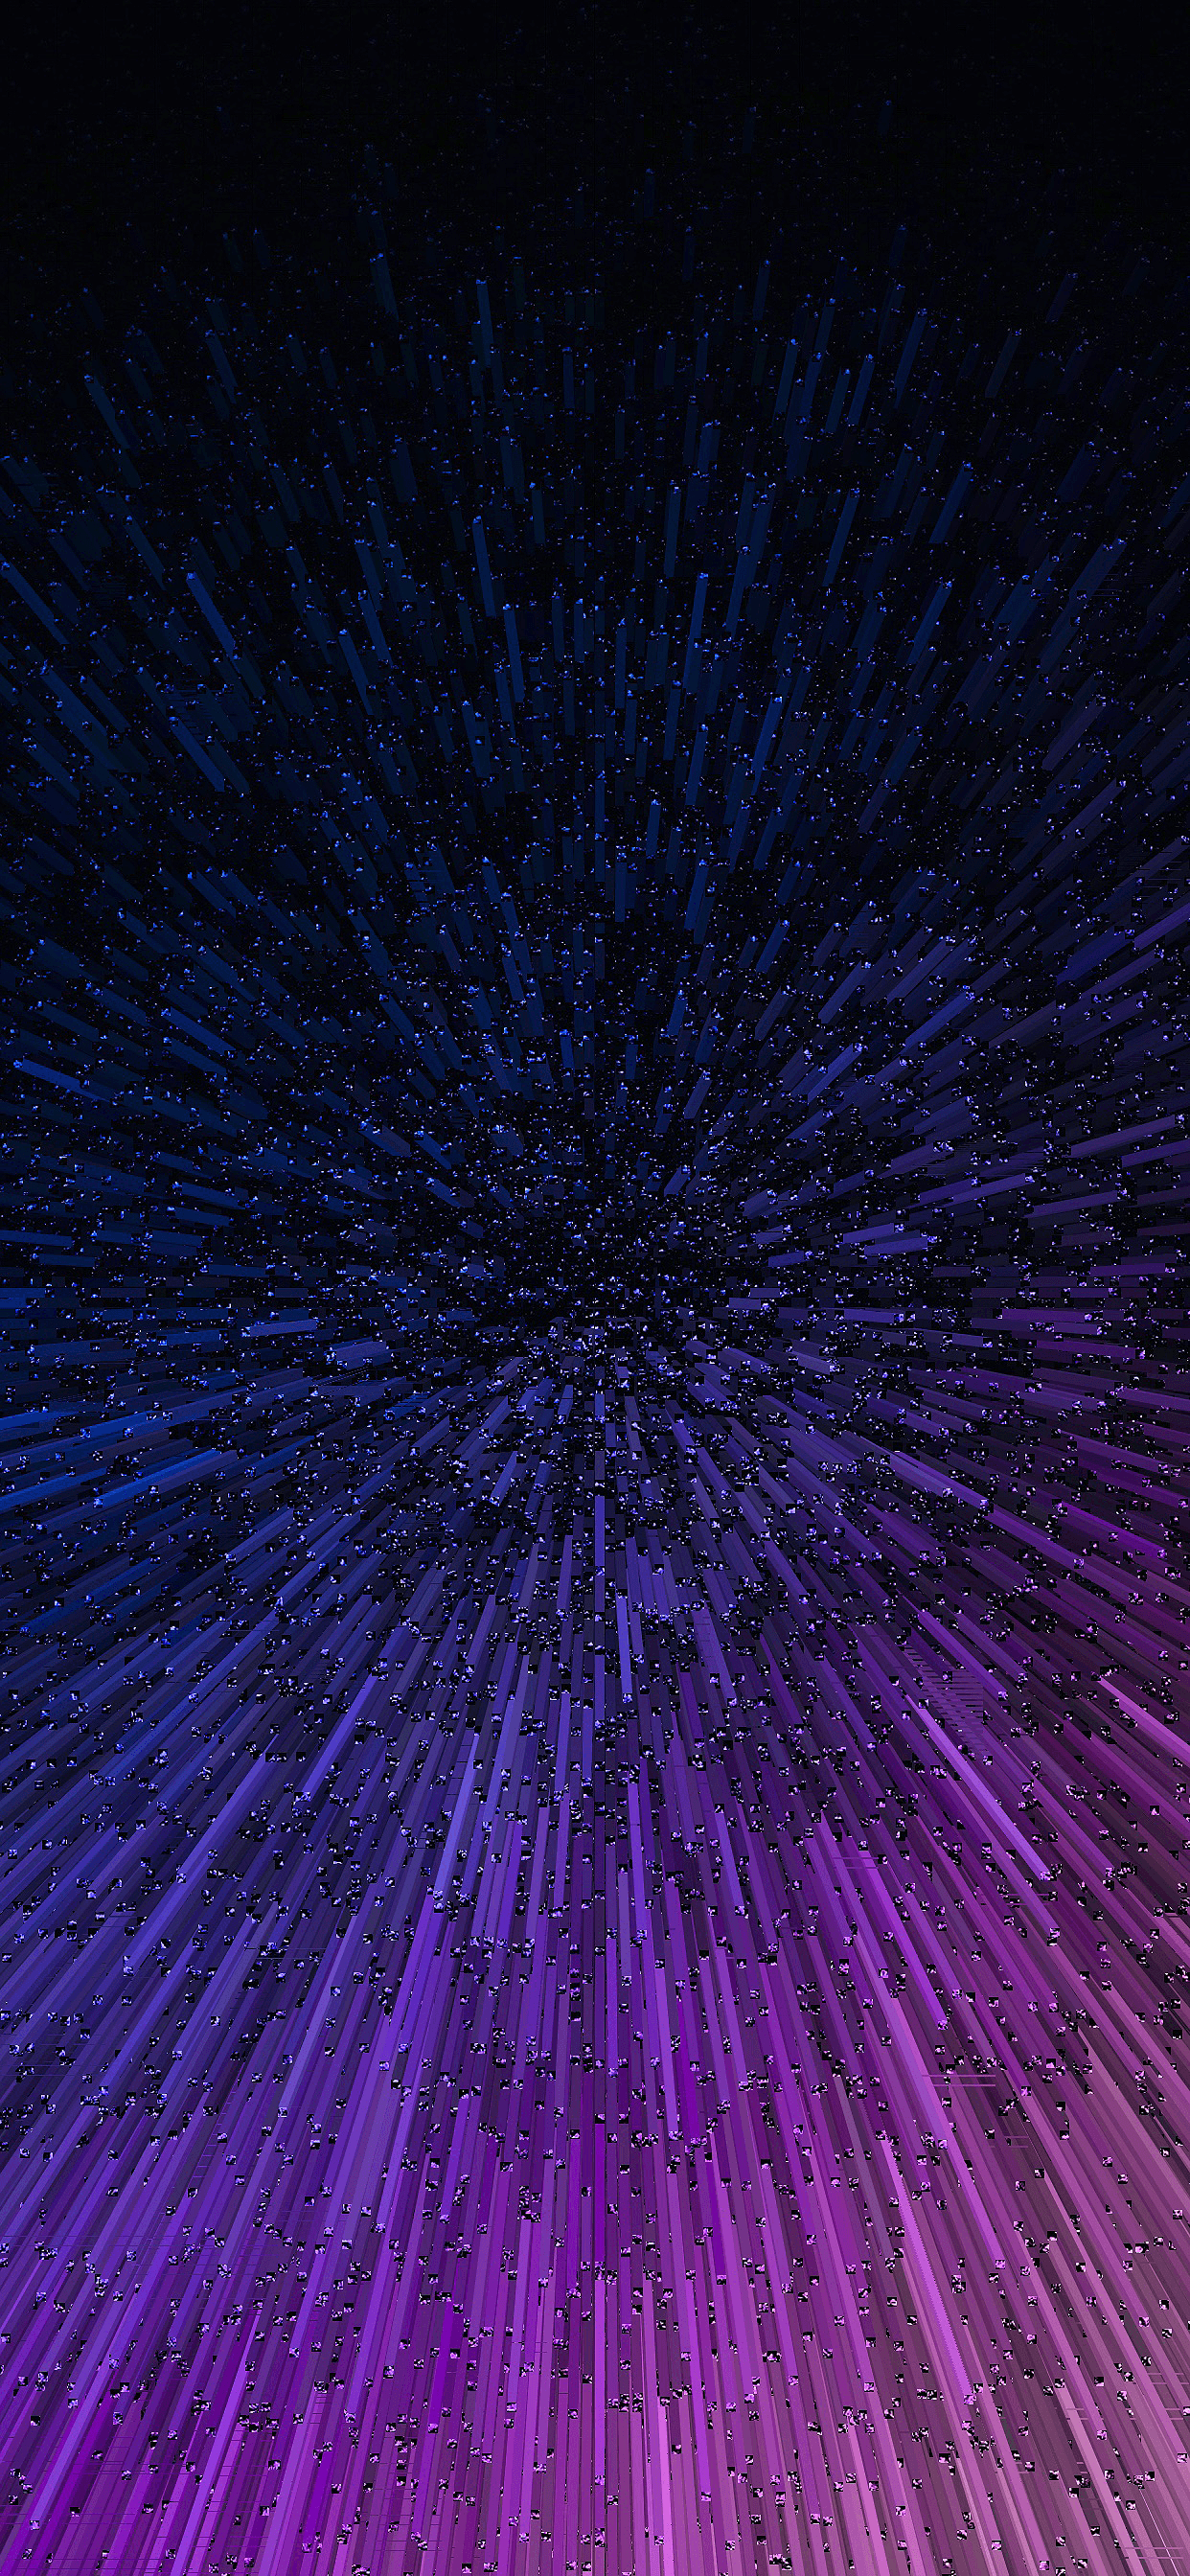 Meteorite Explosion For For iPhone Xs Max Wallpaper iPhone